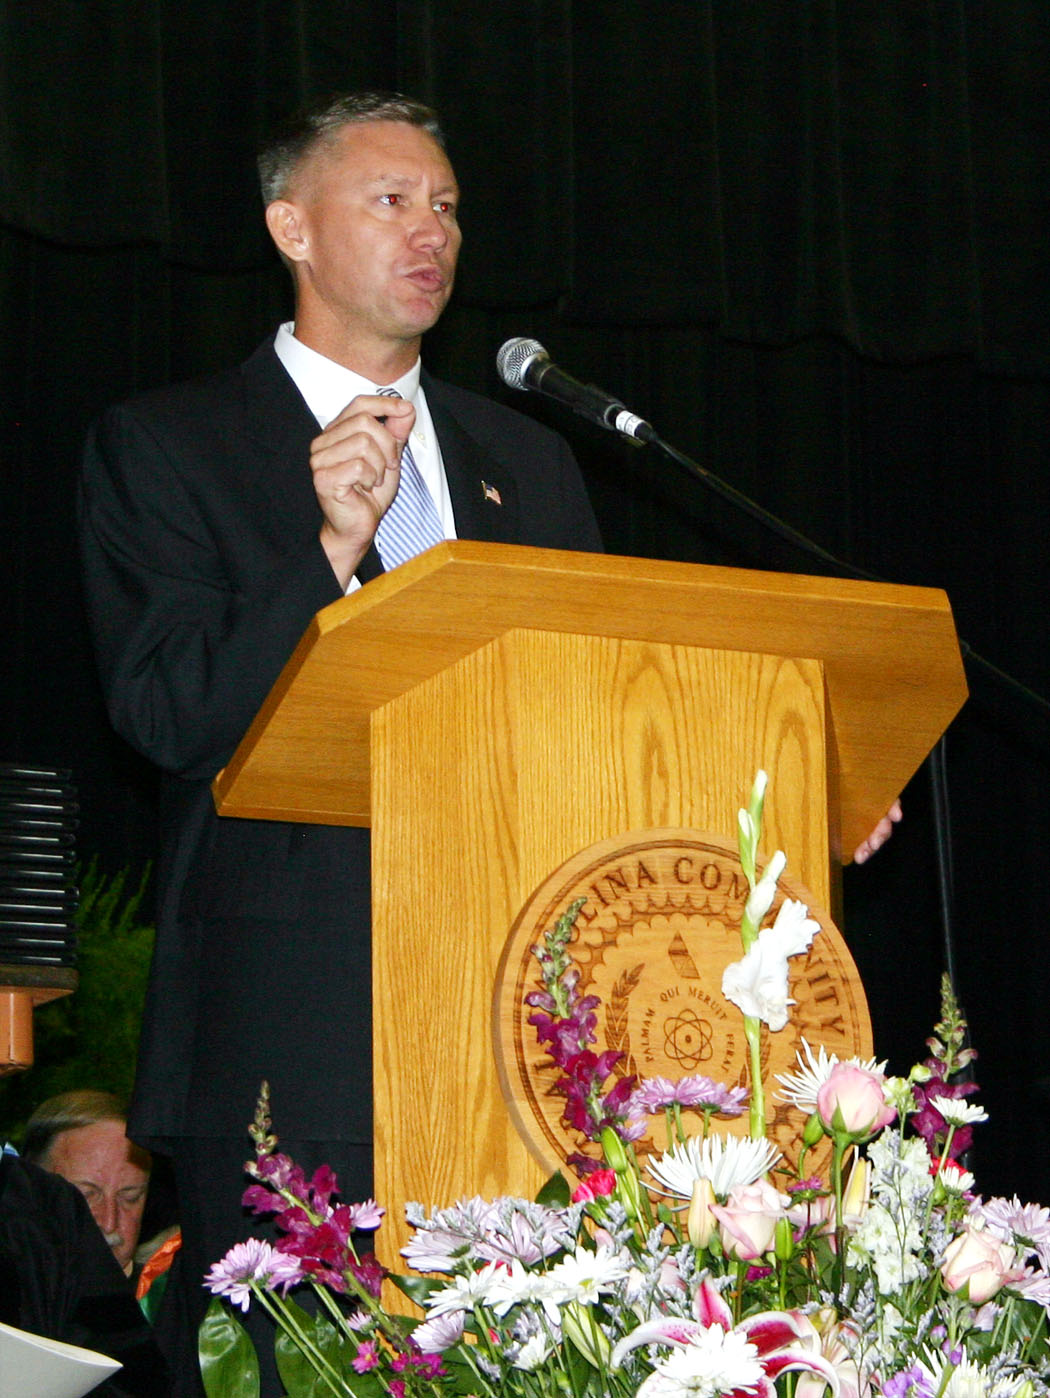 Click to enlarge,  Teddy Byrd, chairman of the Harnett County Board of Commissioners, delivered the commencement address Friday at Central Carolina Community College&#8217;s 45th Annual Summer Commencement Exercises. He urged the graduating class to strive for their best. A crowd of approximately 1,000 family members and friends attended the exercise, held in the Dennis A. Wicker Civic Center, to celebrate the graduating students&#8217; achievements. During the summer, 89 students completed degrees, 102 earned diplomas, and 84, certificates. About 150 graduating students took part in the exercises.  